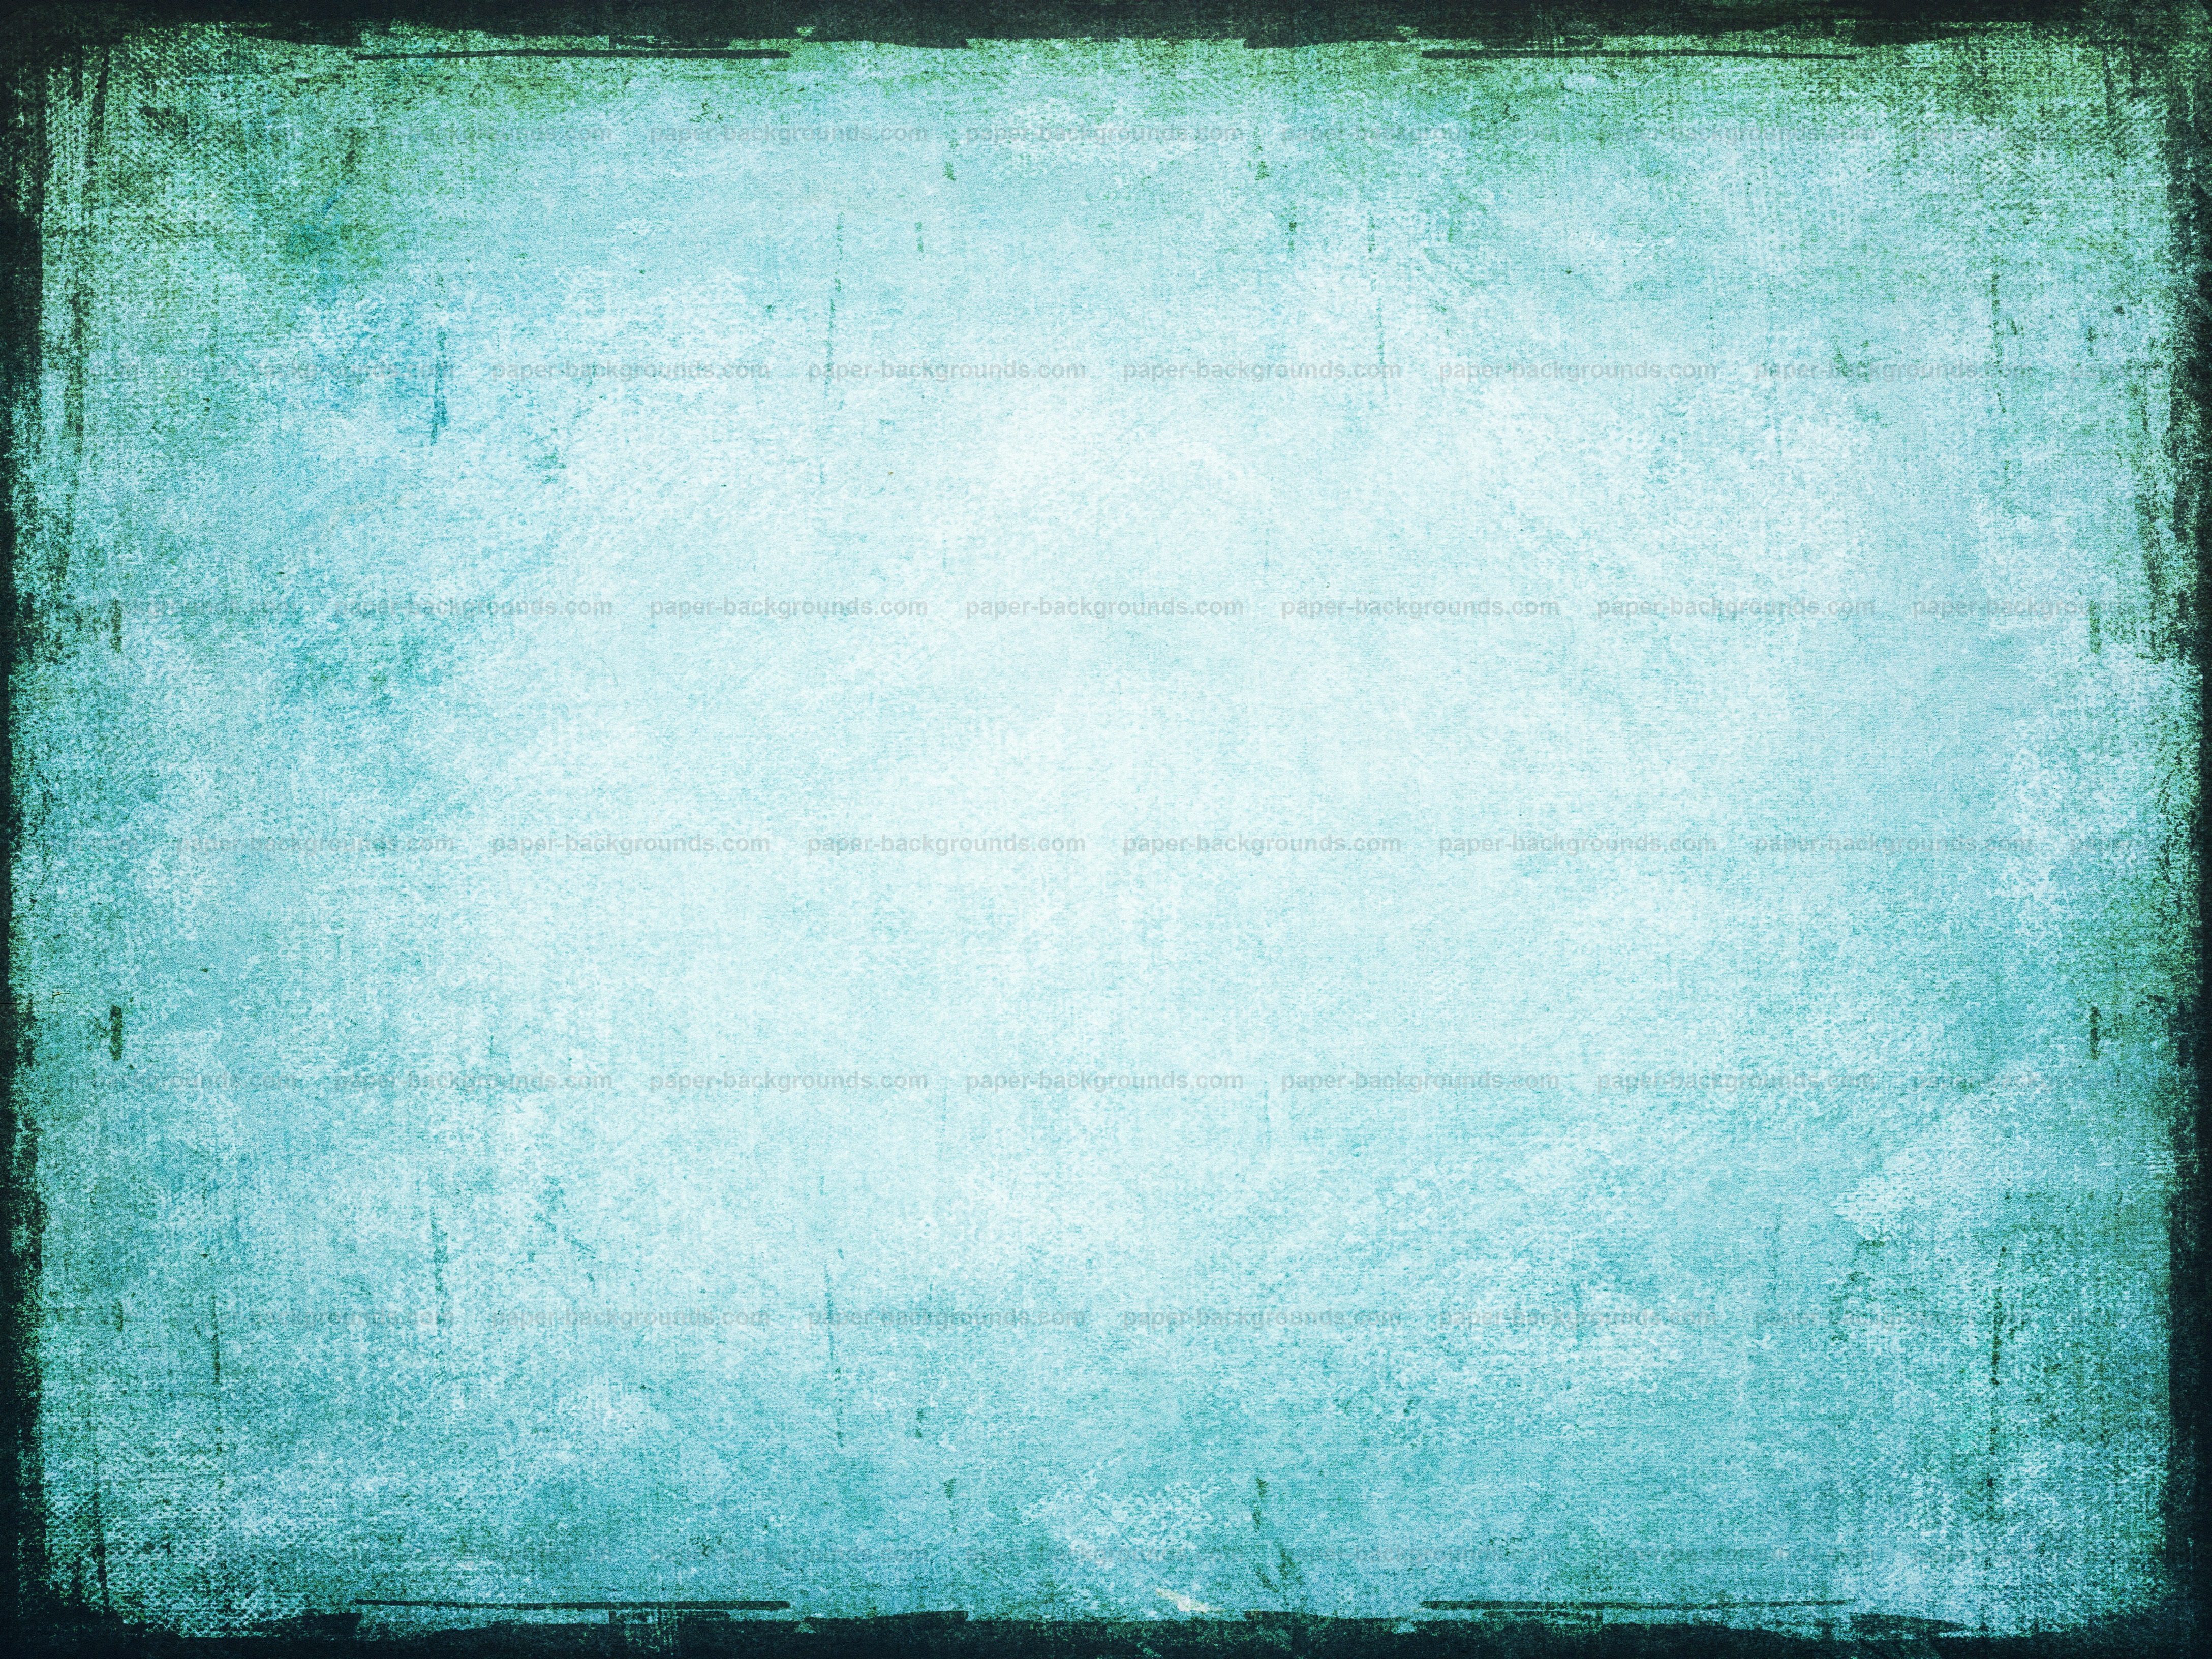 Paper Background Grunge Blue Painted Wall Background